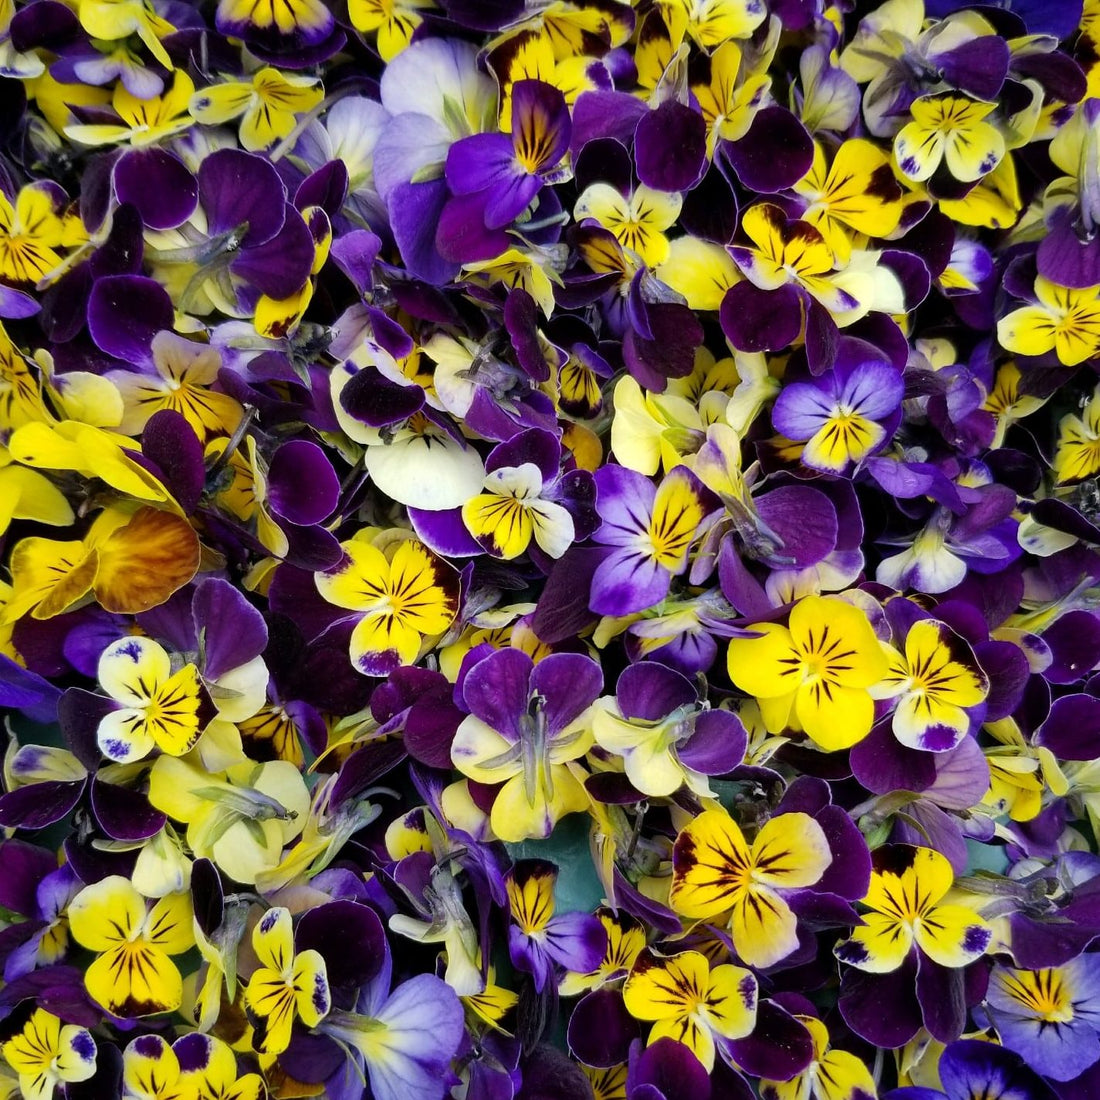 Edible Flowers for Cakes, Salads, and Other Culinary Adventures